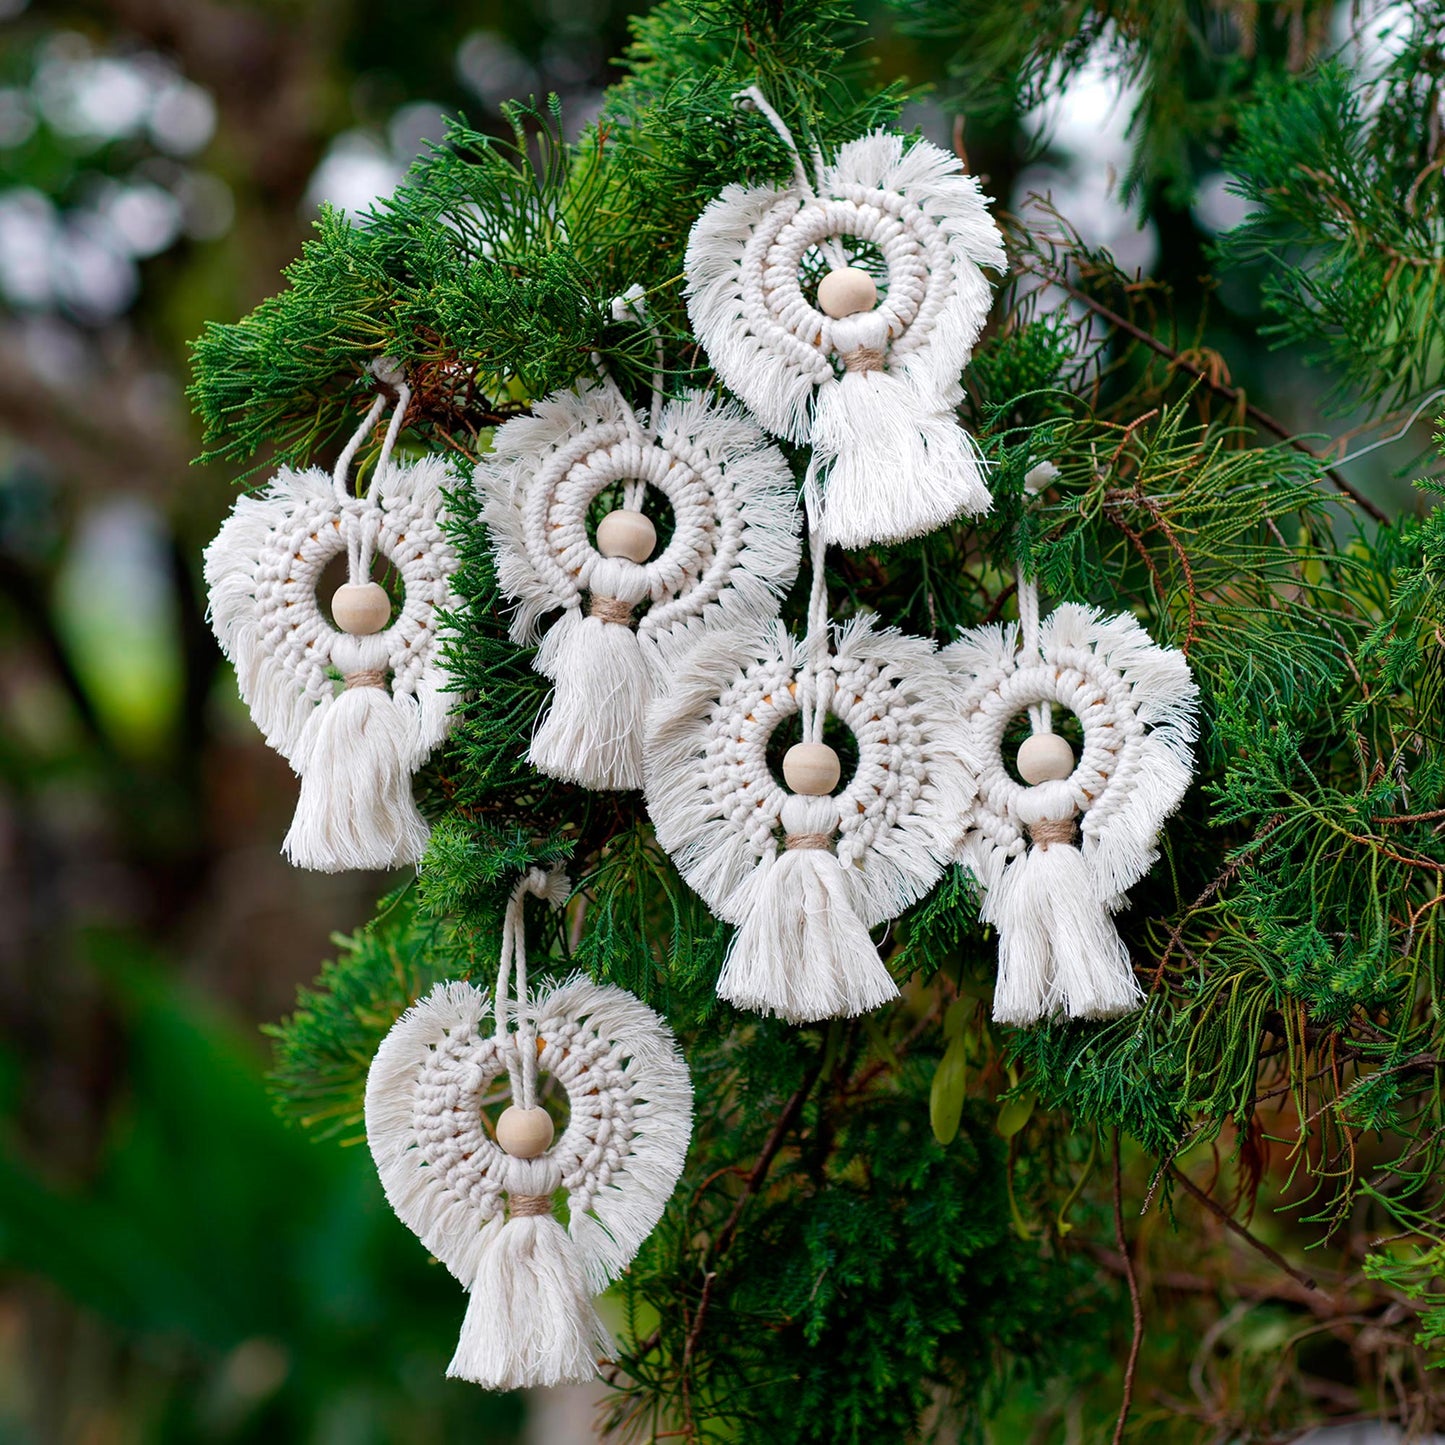 Snow Angels Cotton and Bamboo Angel Holiday Ornaments (Set of 6)